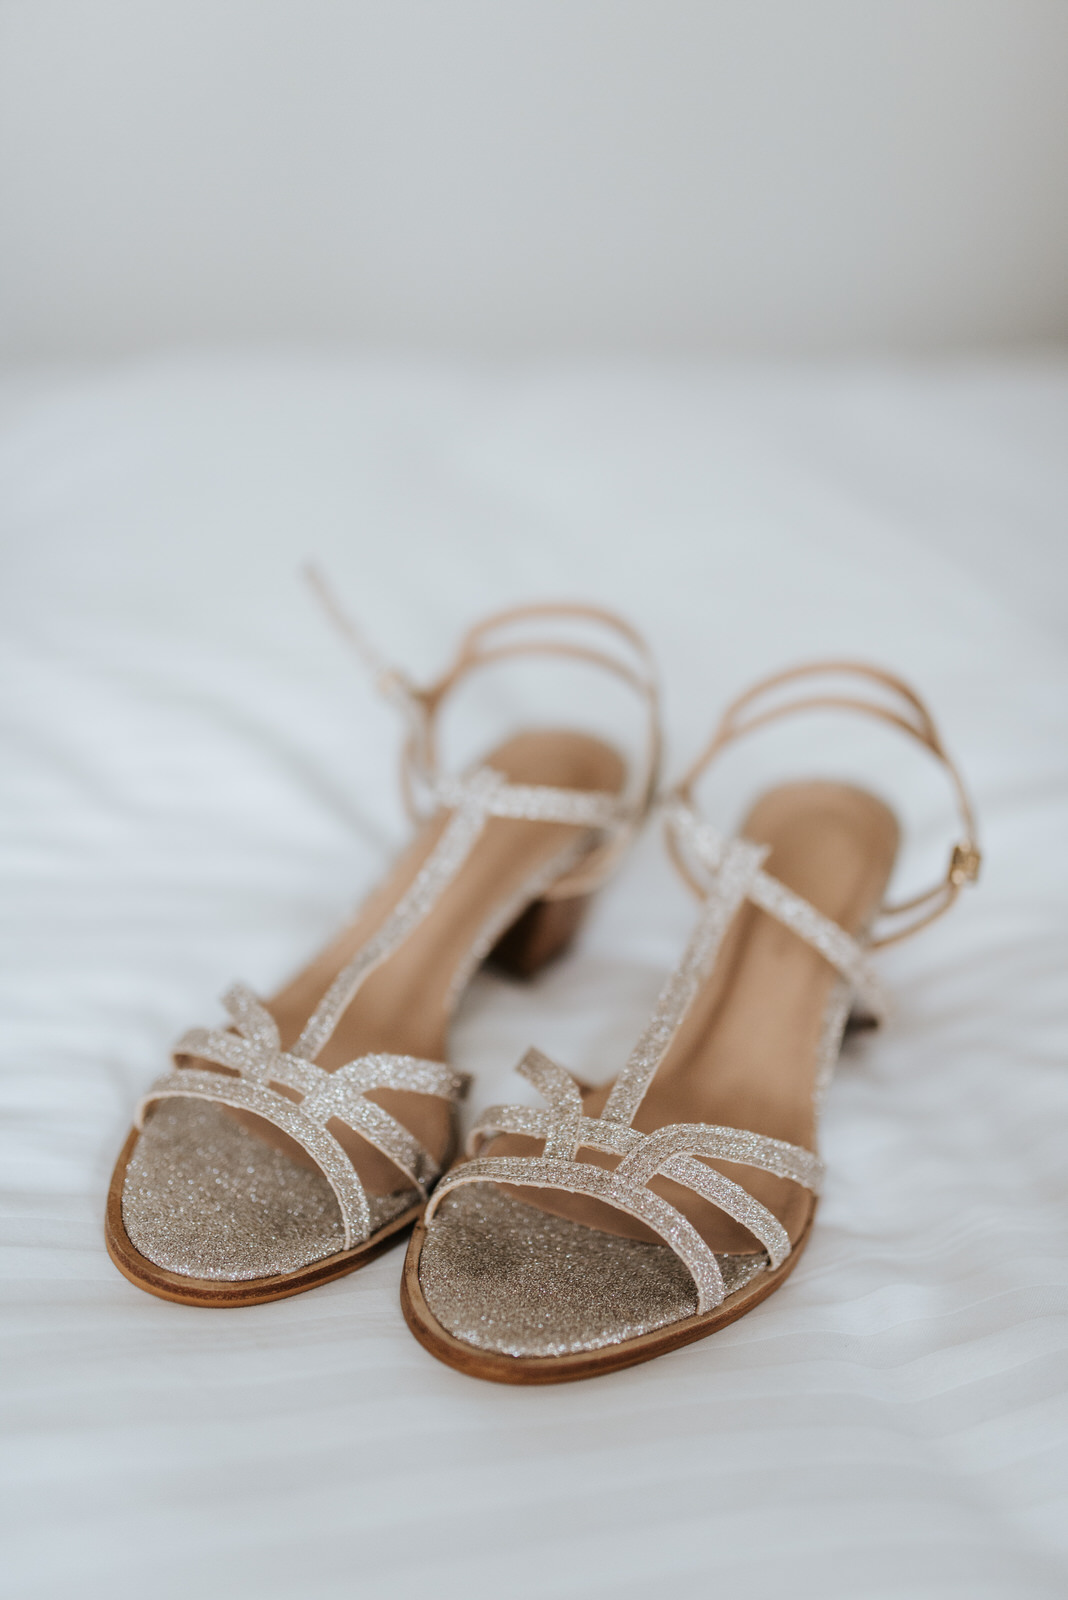 Detail shot of the bride's wedding shoes